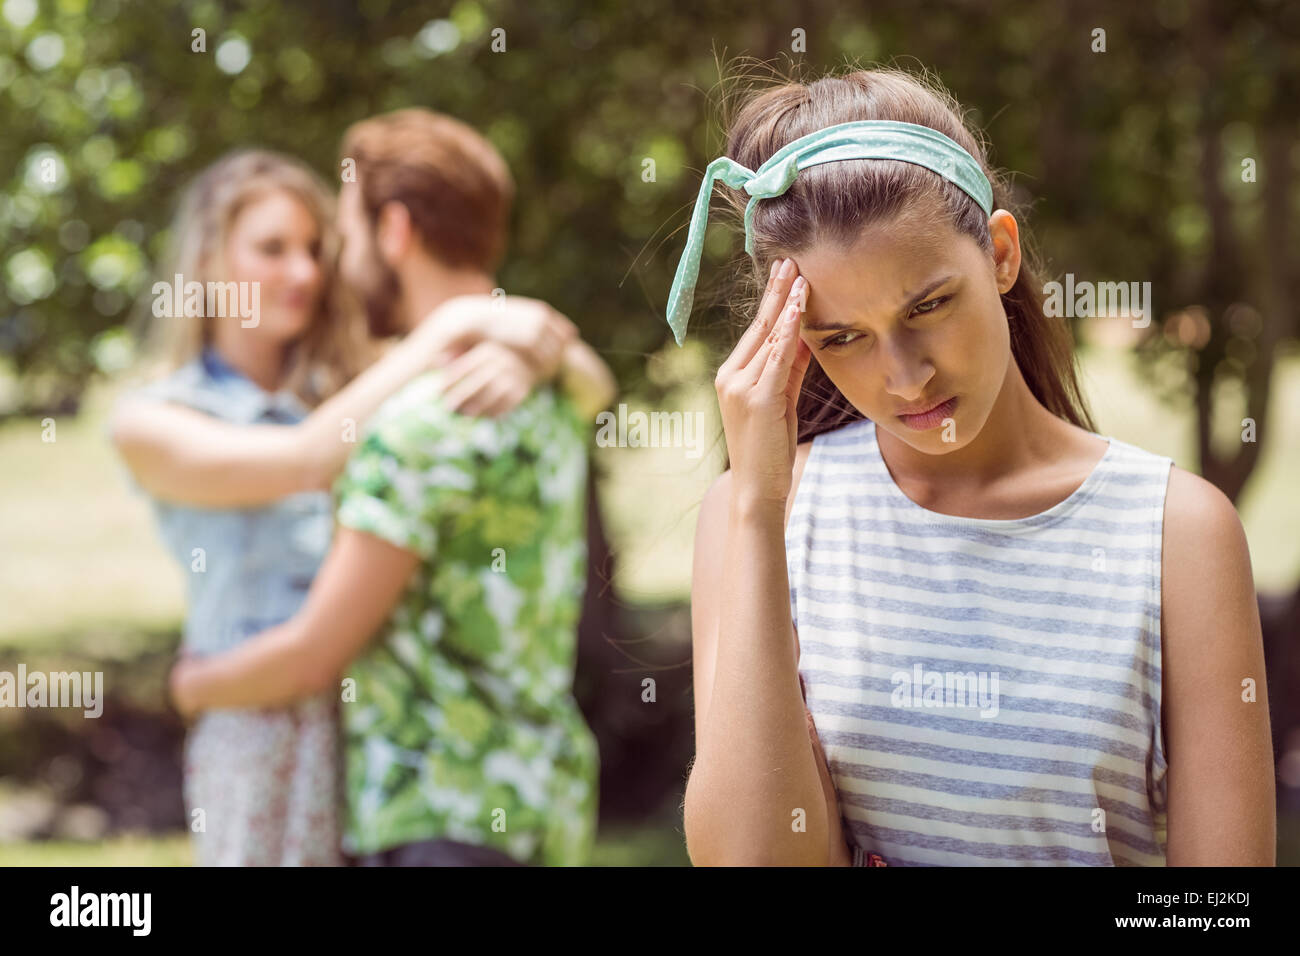 Brunette upset at seeing boyfriend with other girl Stock Photo